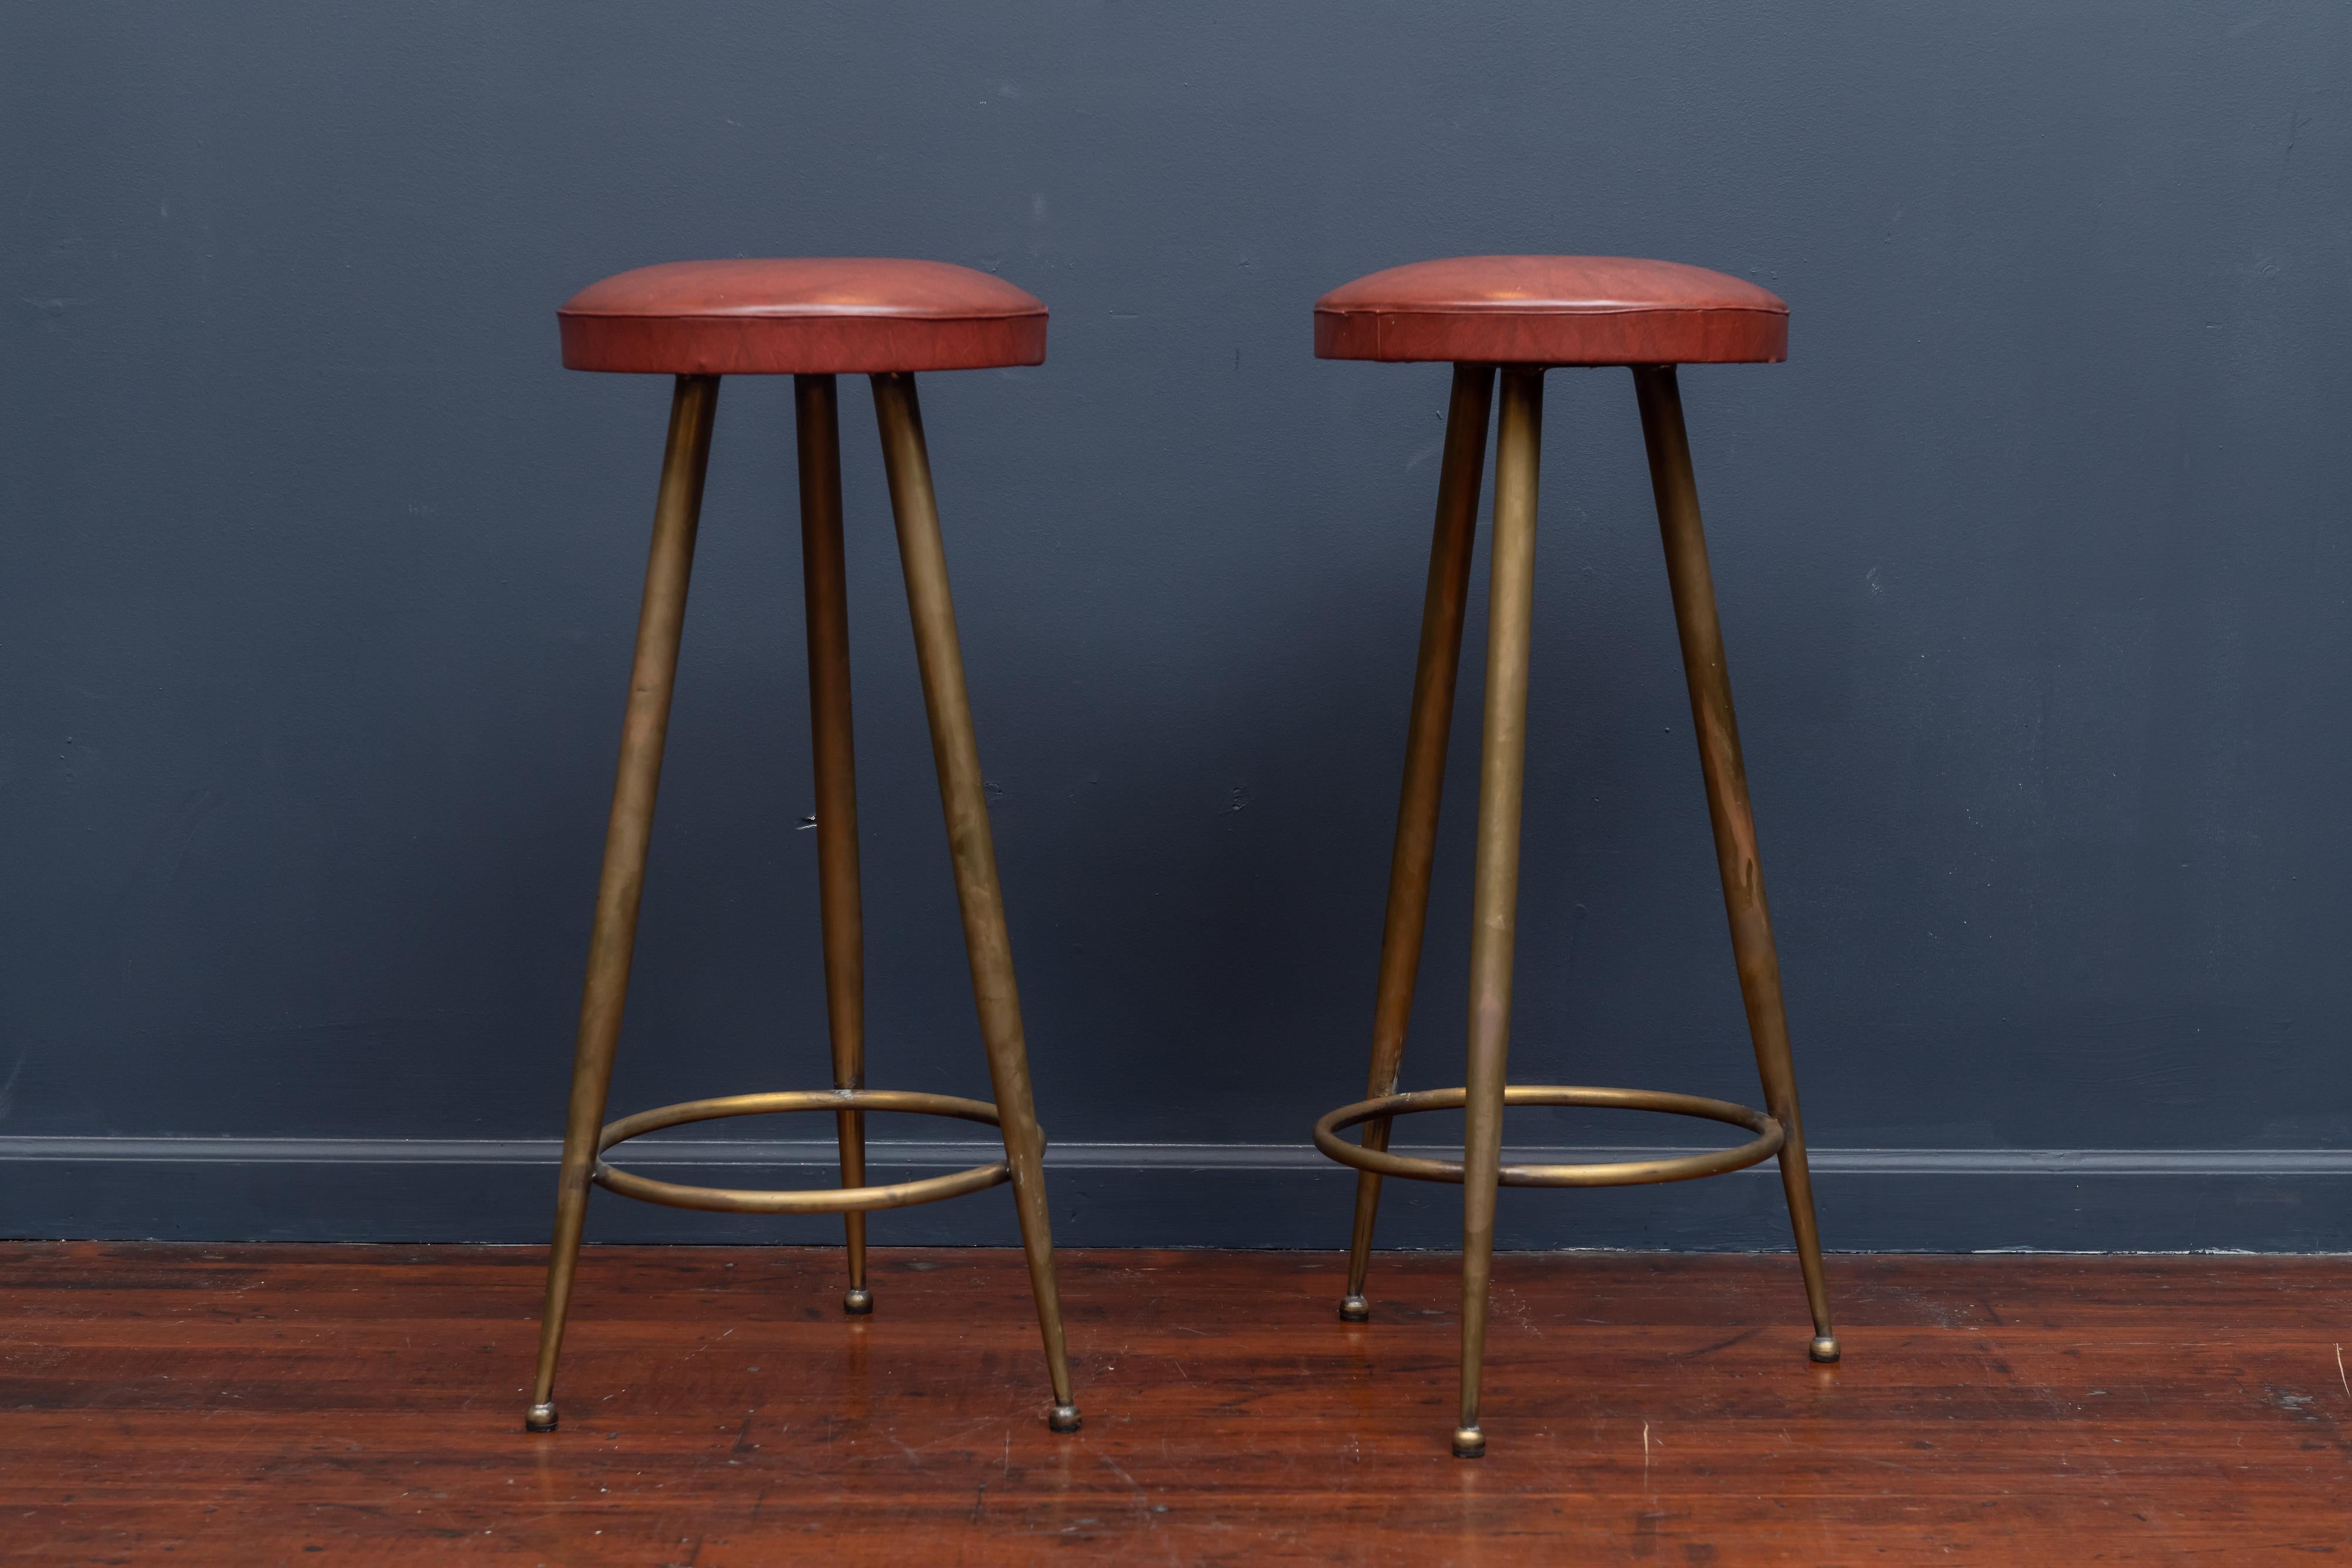 Pair of chic Italian brass bar stools with vinyl seat cushions, in very good vintage condition.